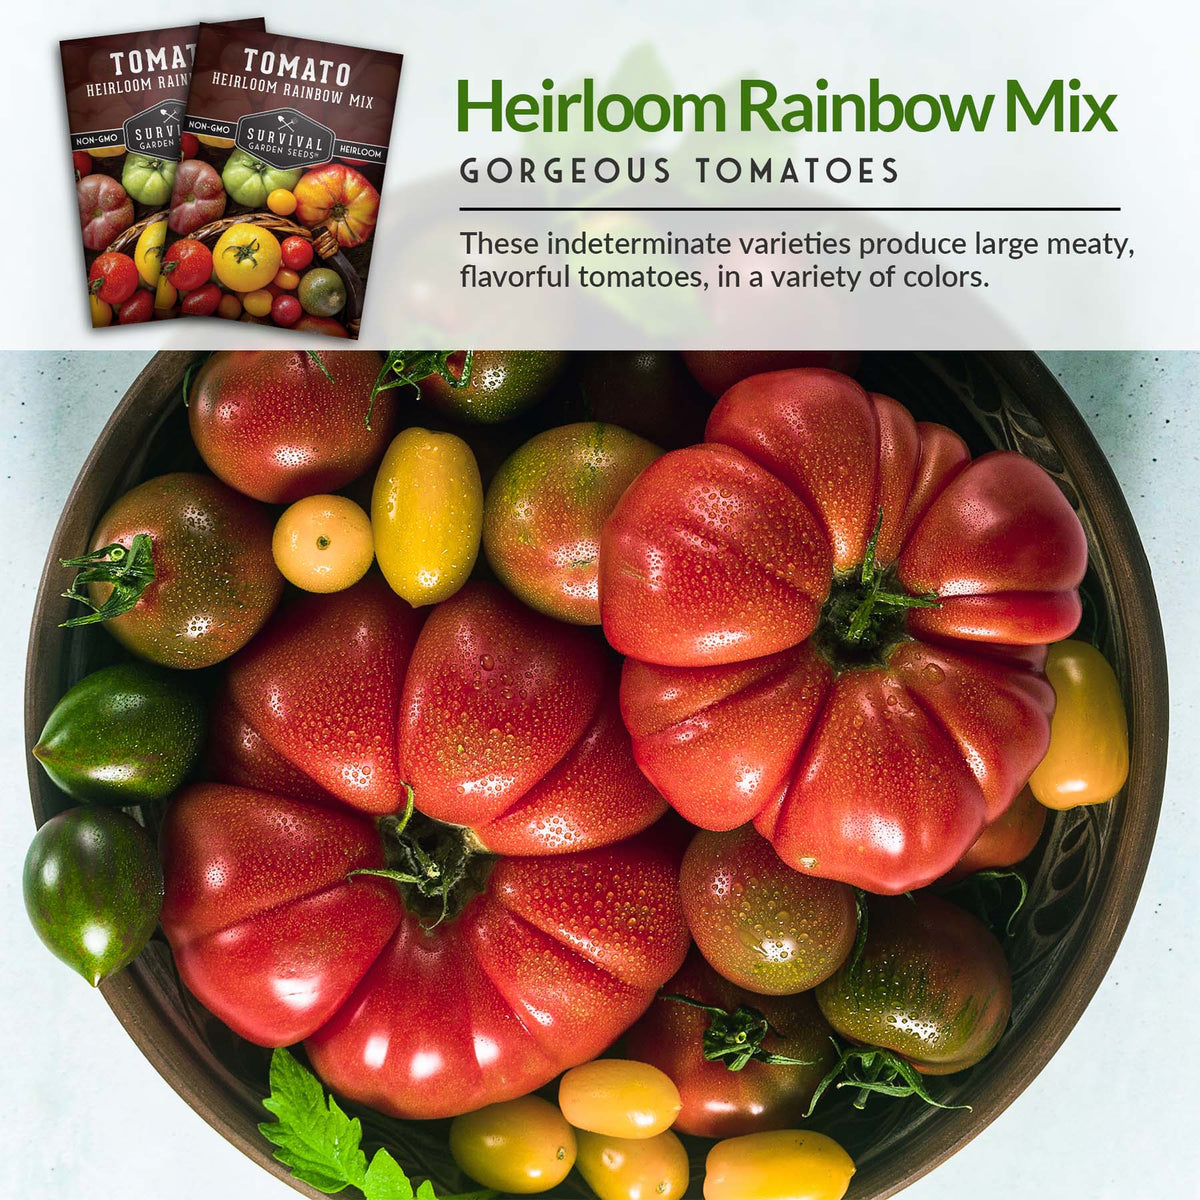 Grow gorgeous tomatoes with heirloom rainbow mix seeds